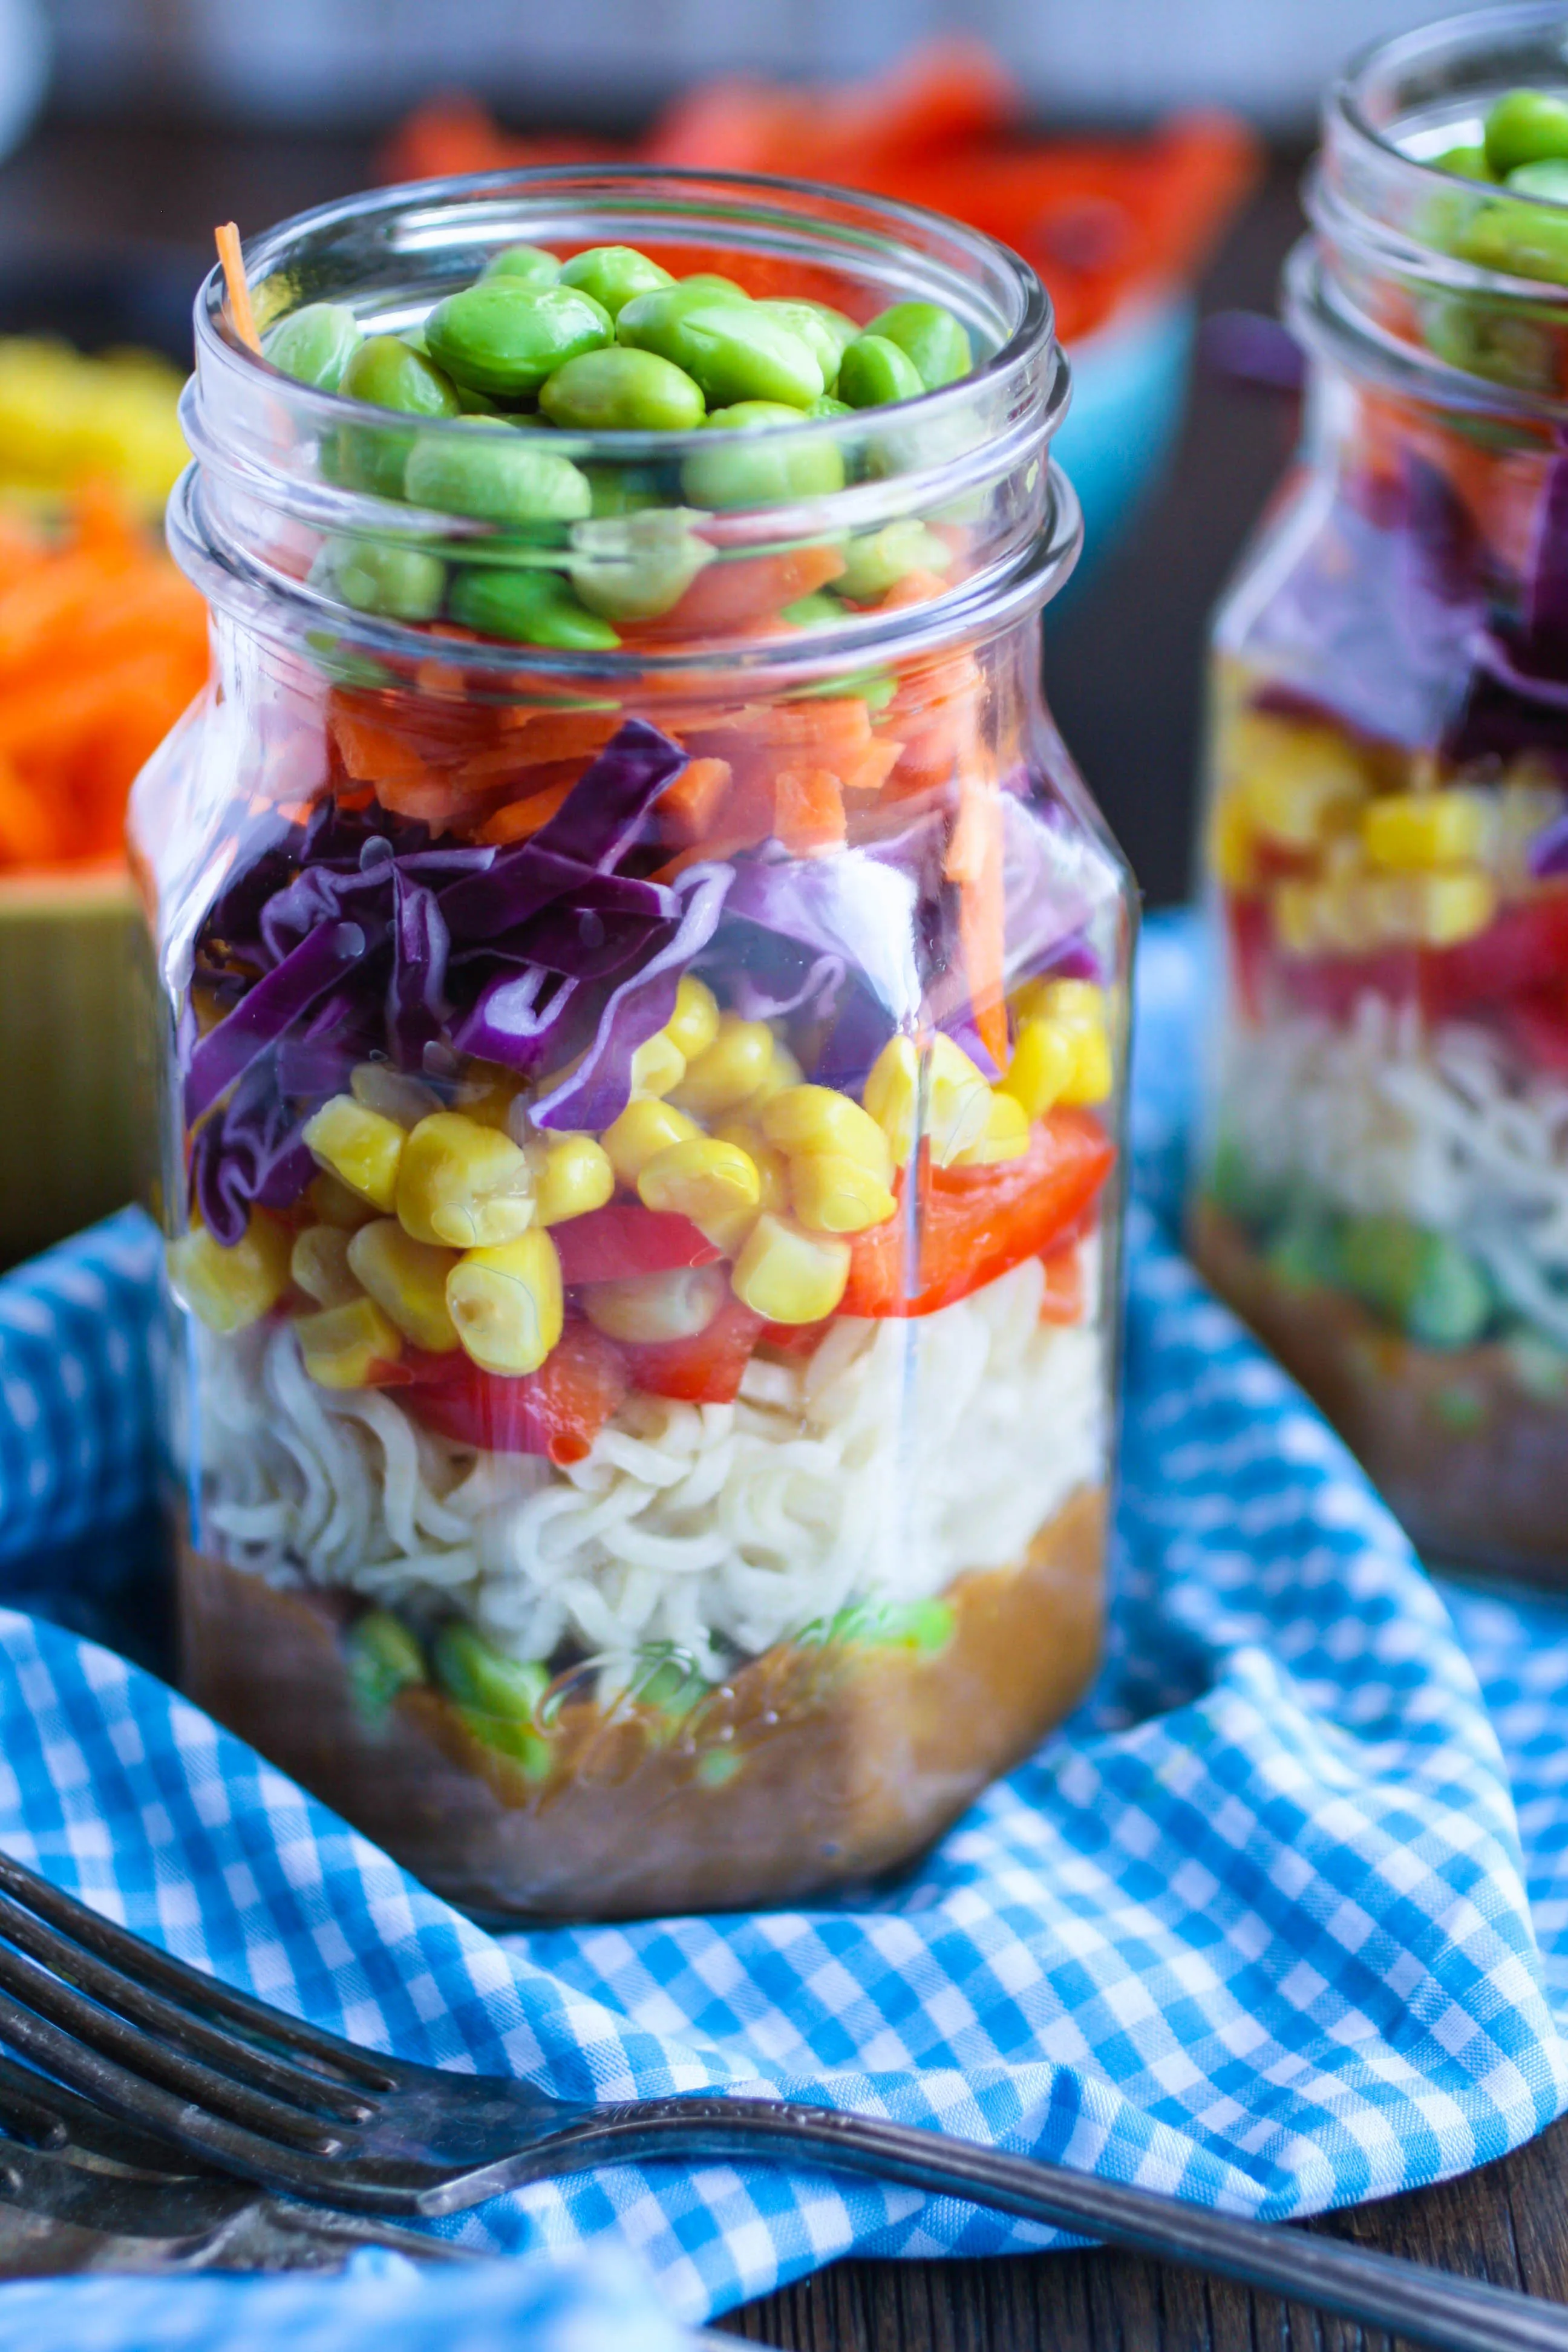 Asian Noodle Salad in a Jar with Spicy Peanut Dressing offers great color and flavors. It's convenient to pack, and delicious to eat!